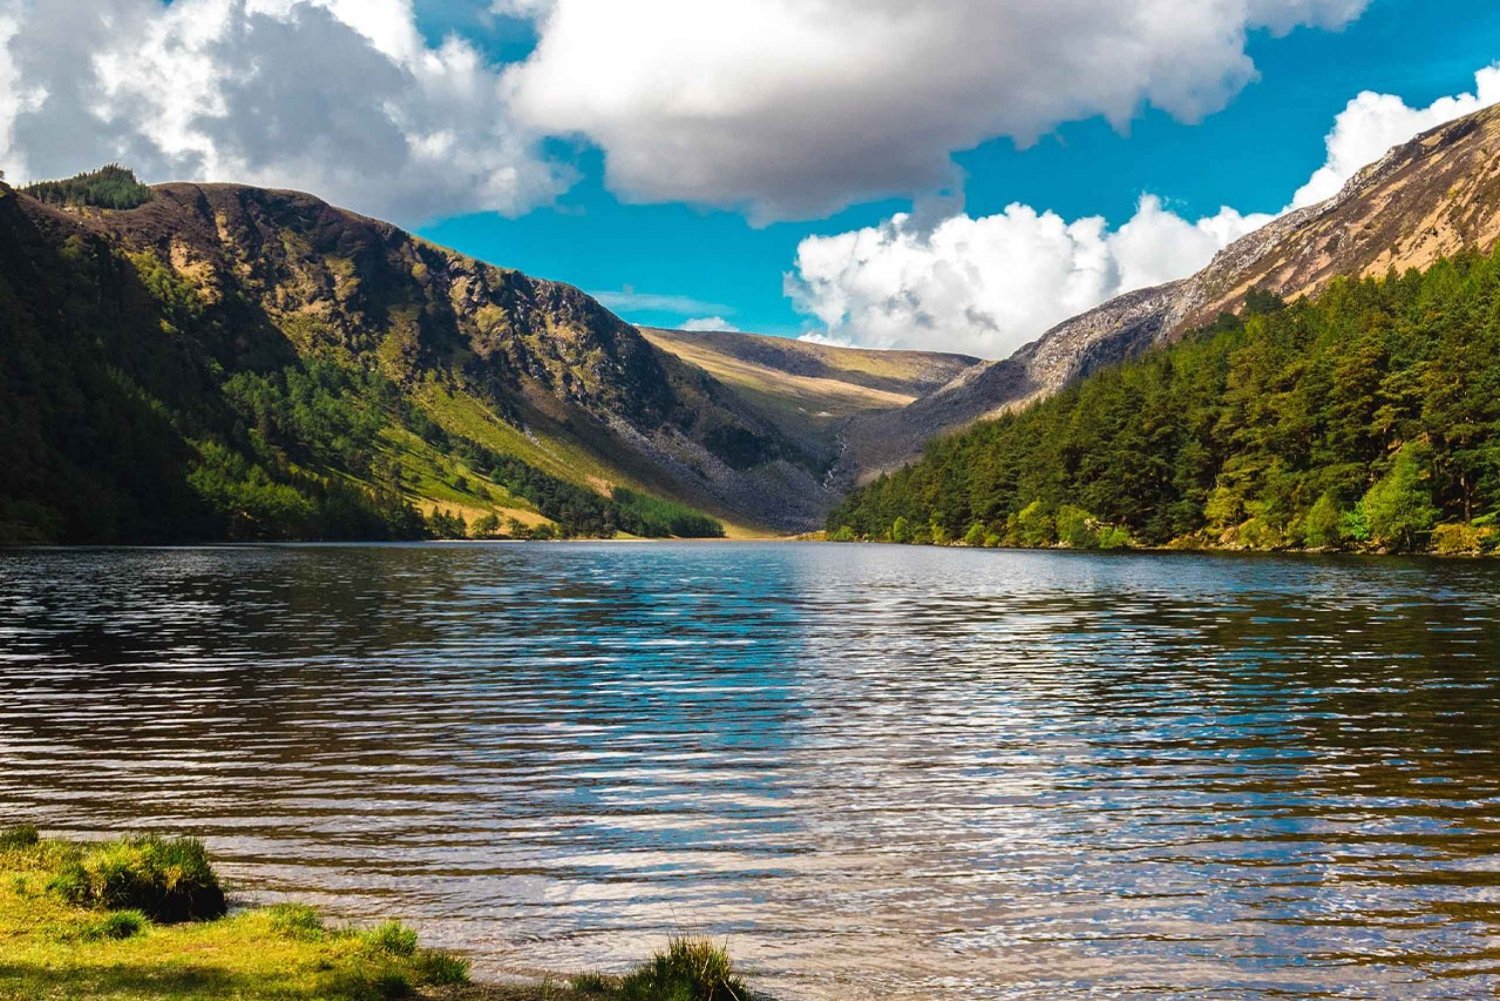 Half-Day Trip to Glendalough and Wicklow